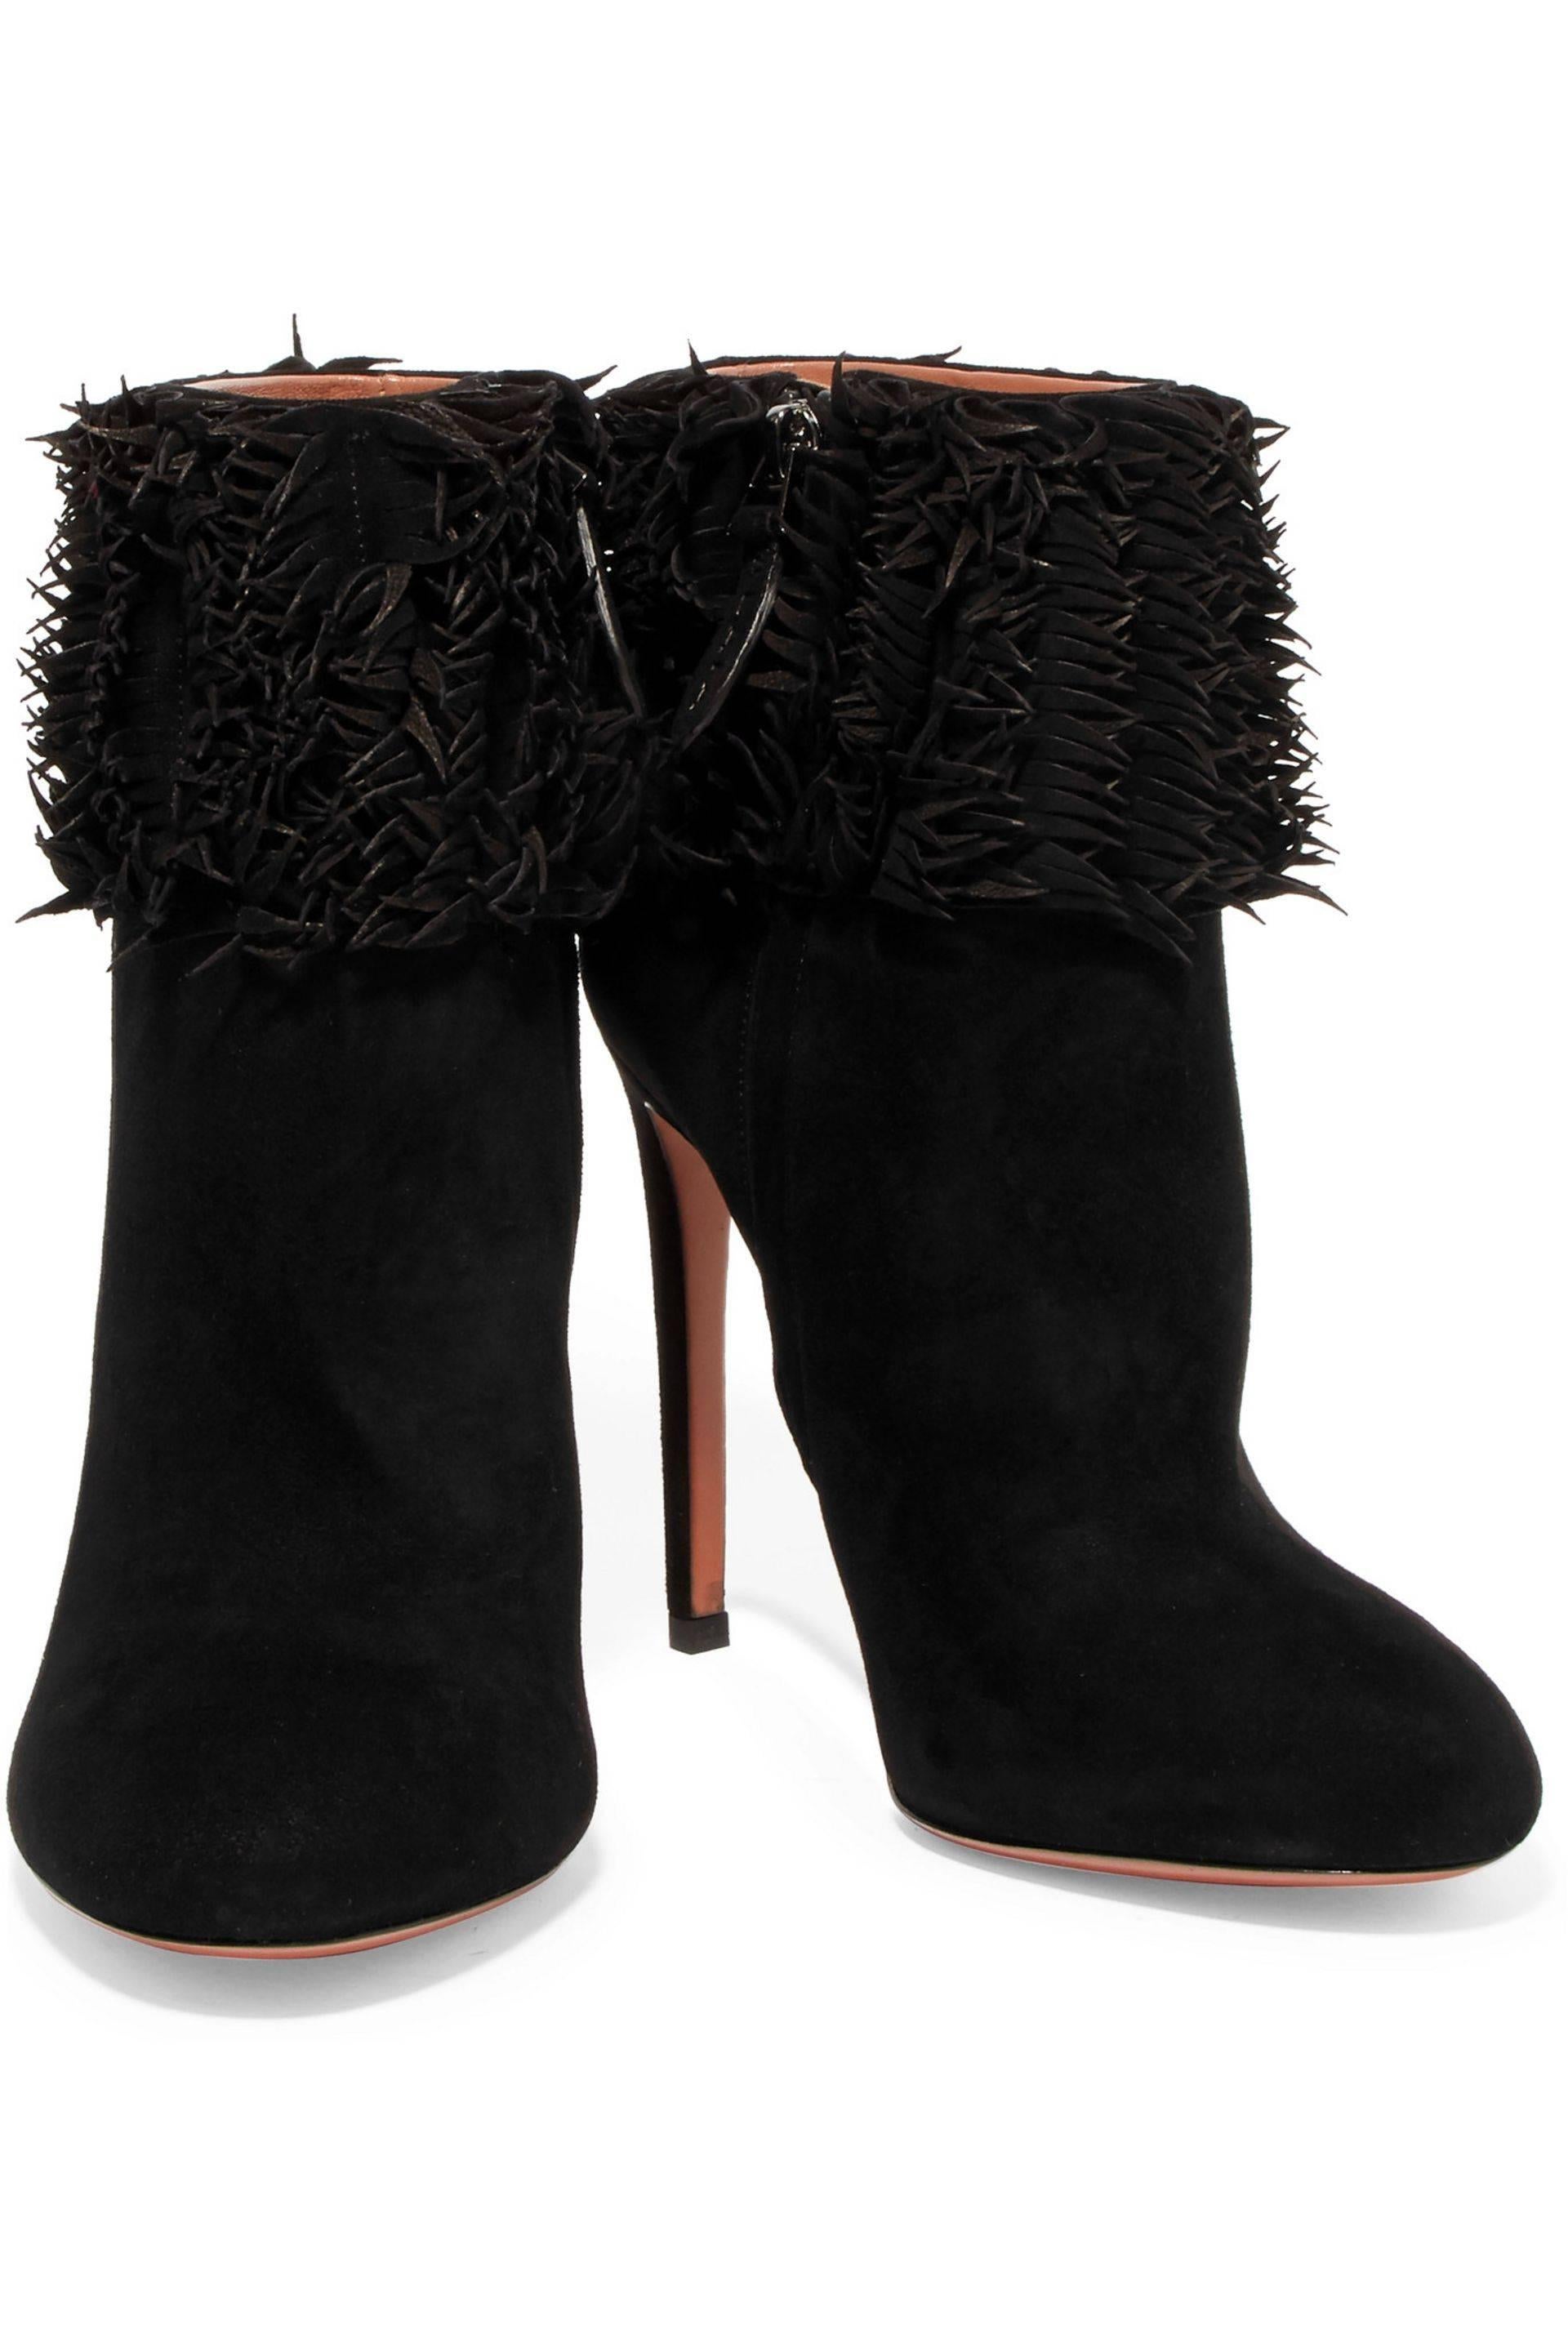 Alaia New Black Suede Ruffle Top Ankle Booties Boots in Box

Size IT 36
Suede
Zipper closure
Made in Italy
Heel height 4"
Includes original Alaia box